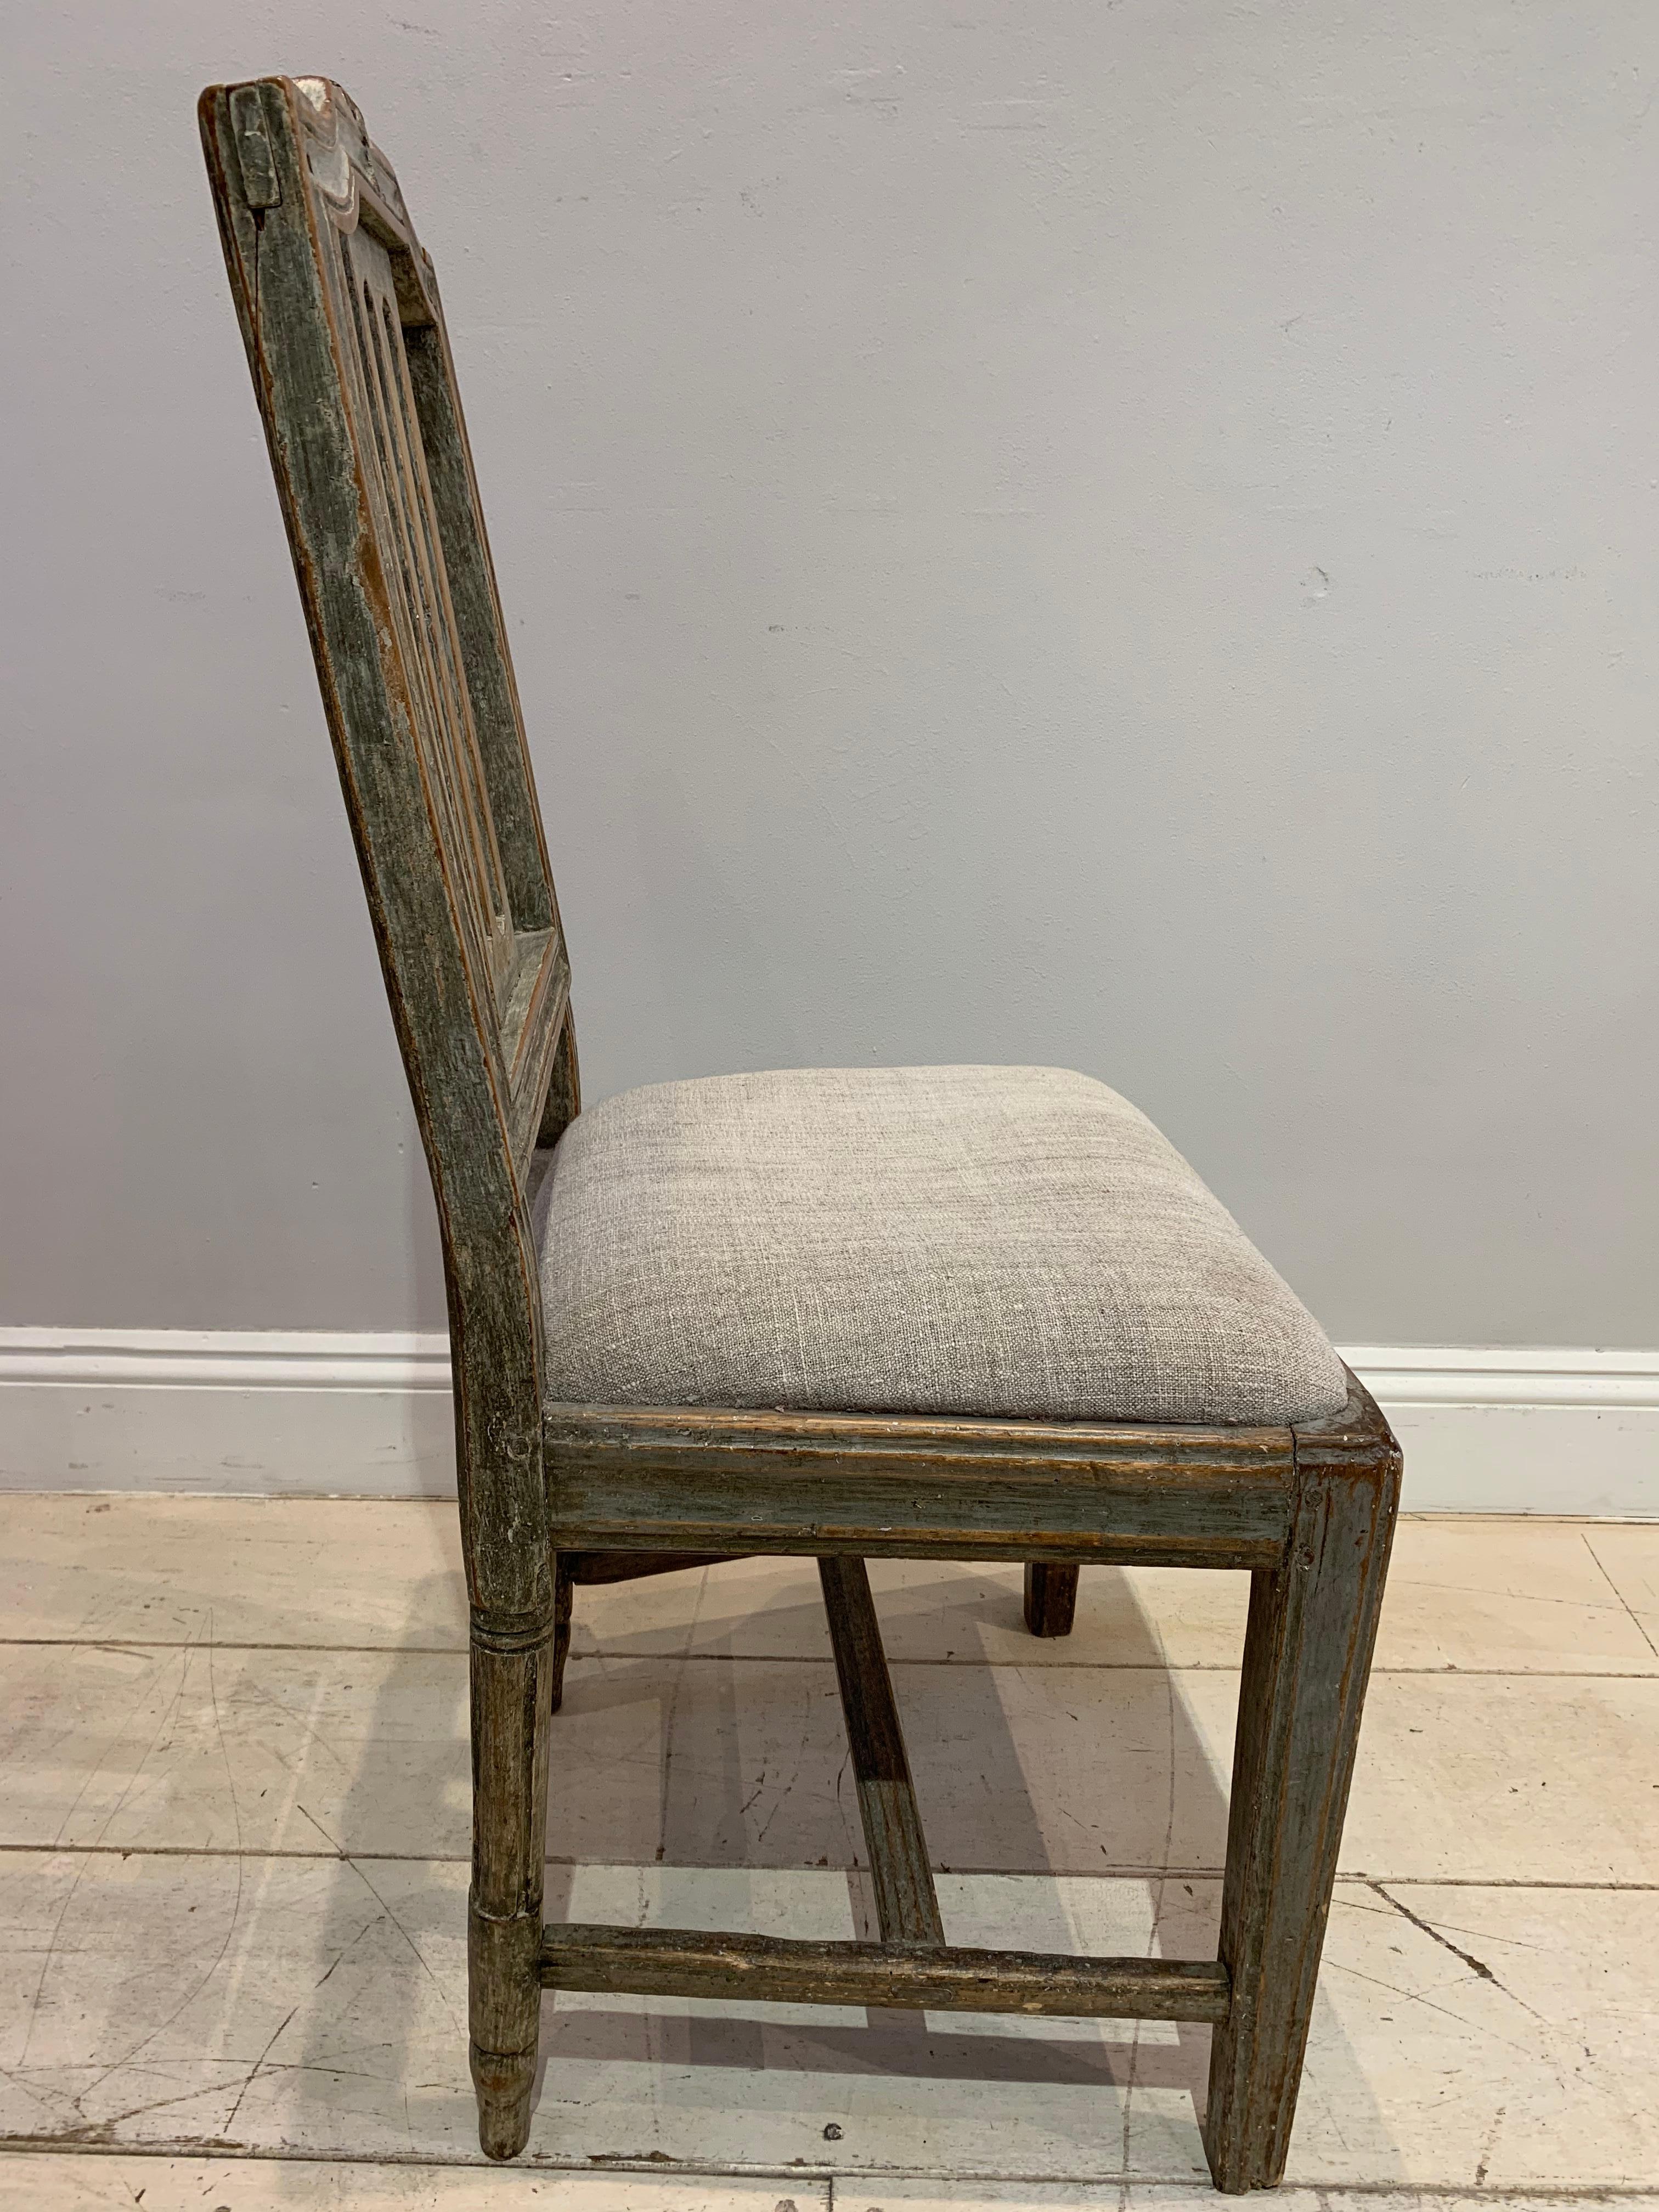 Painted Gustavian Swedish Side Chair with Decorative Flower Carving, circa 1800 For Sale 2